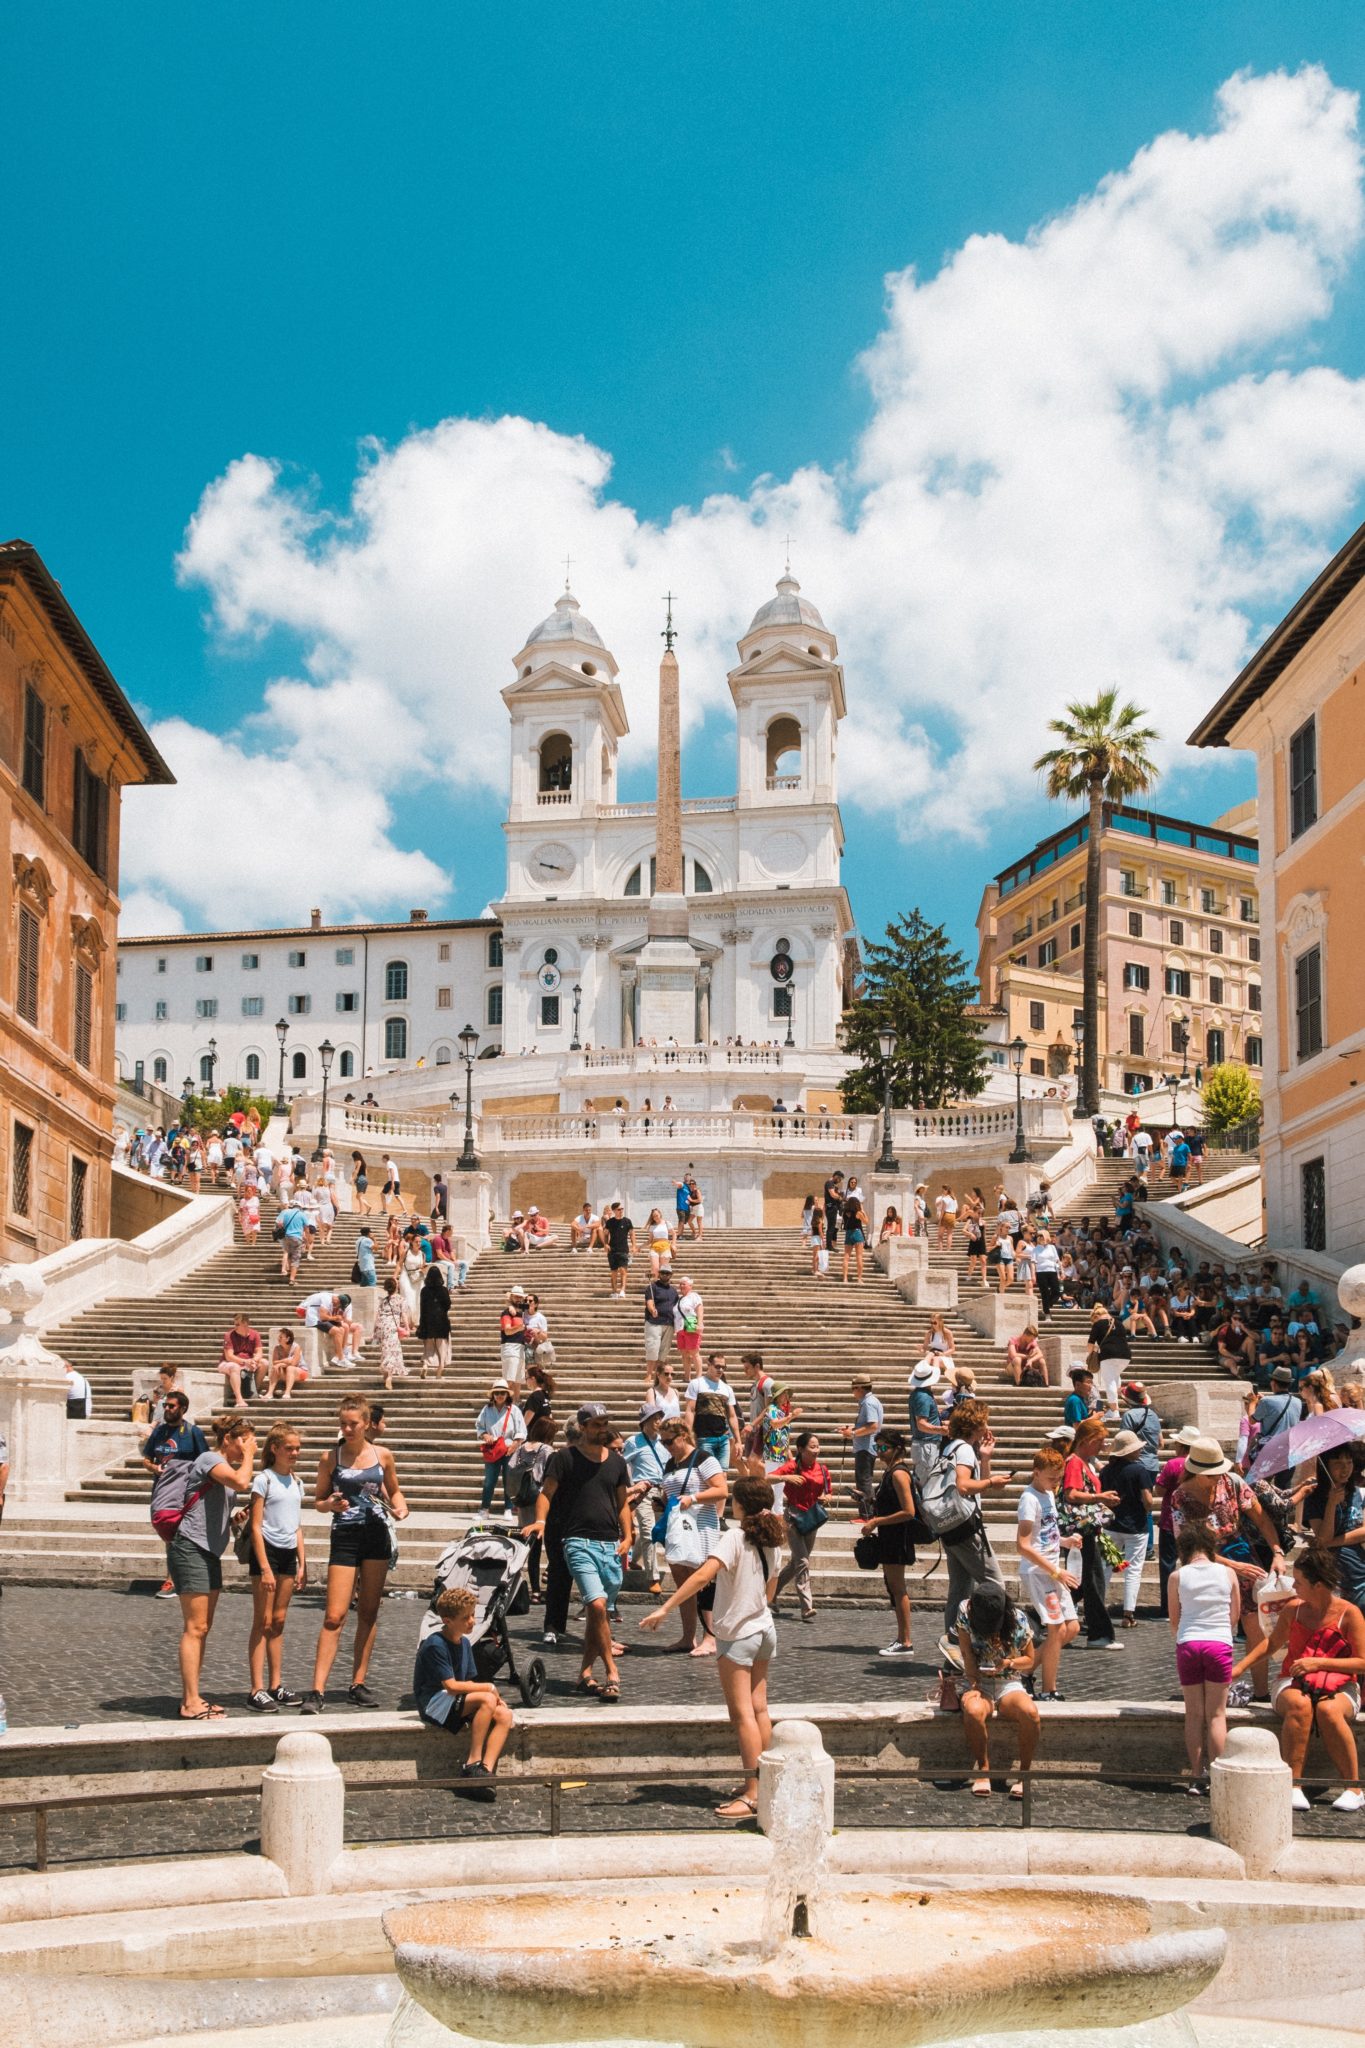 The Spanish Steps in Rome, Italy | What to Do in Rome Travel Guide | GoodTomiCha.com